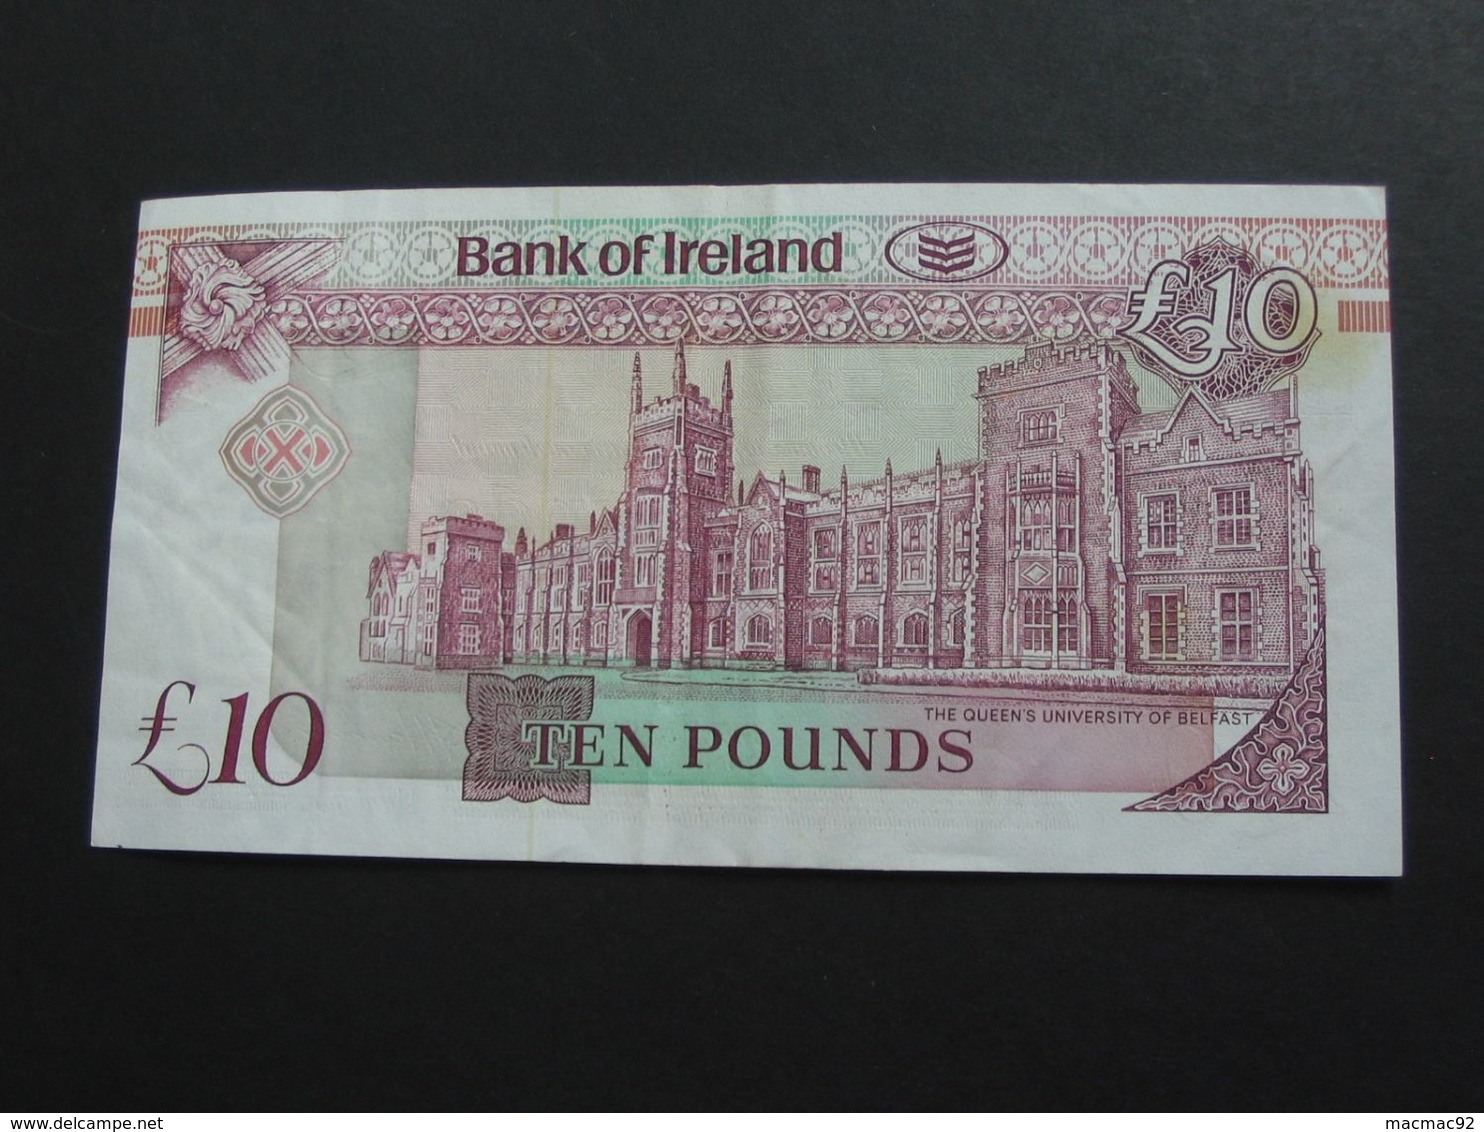 10 Ten Pound 1991 - Central Bank Of Ireland - Belfast Donegall Place  **** EN ACHAT IMMEDIAT **** - Irland